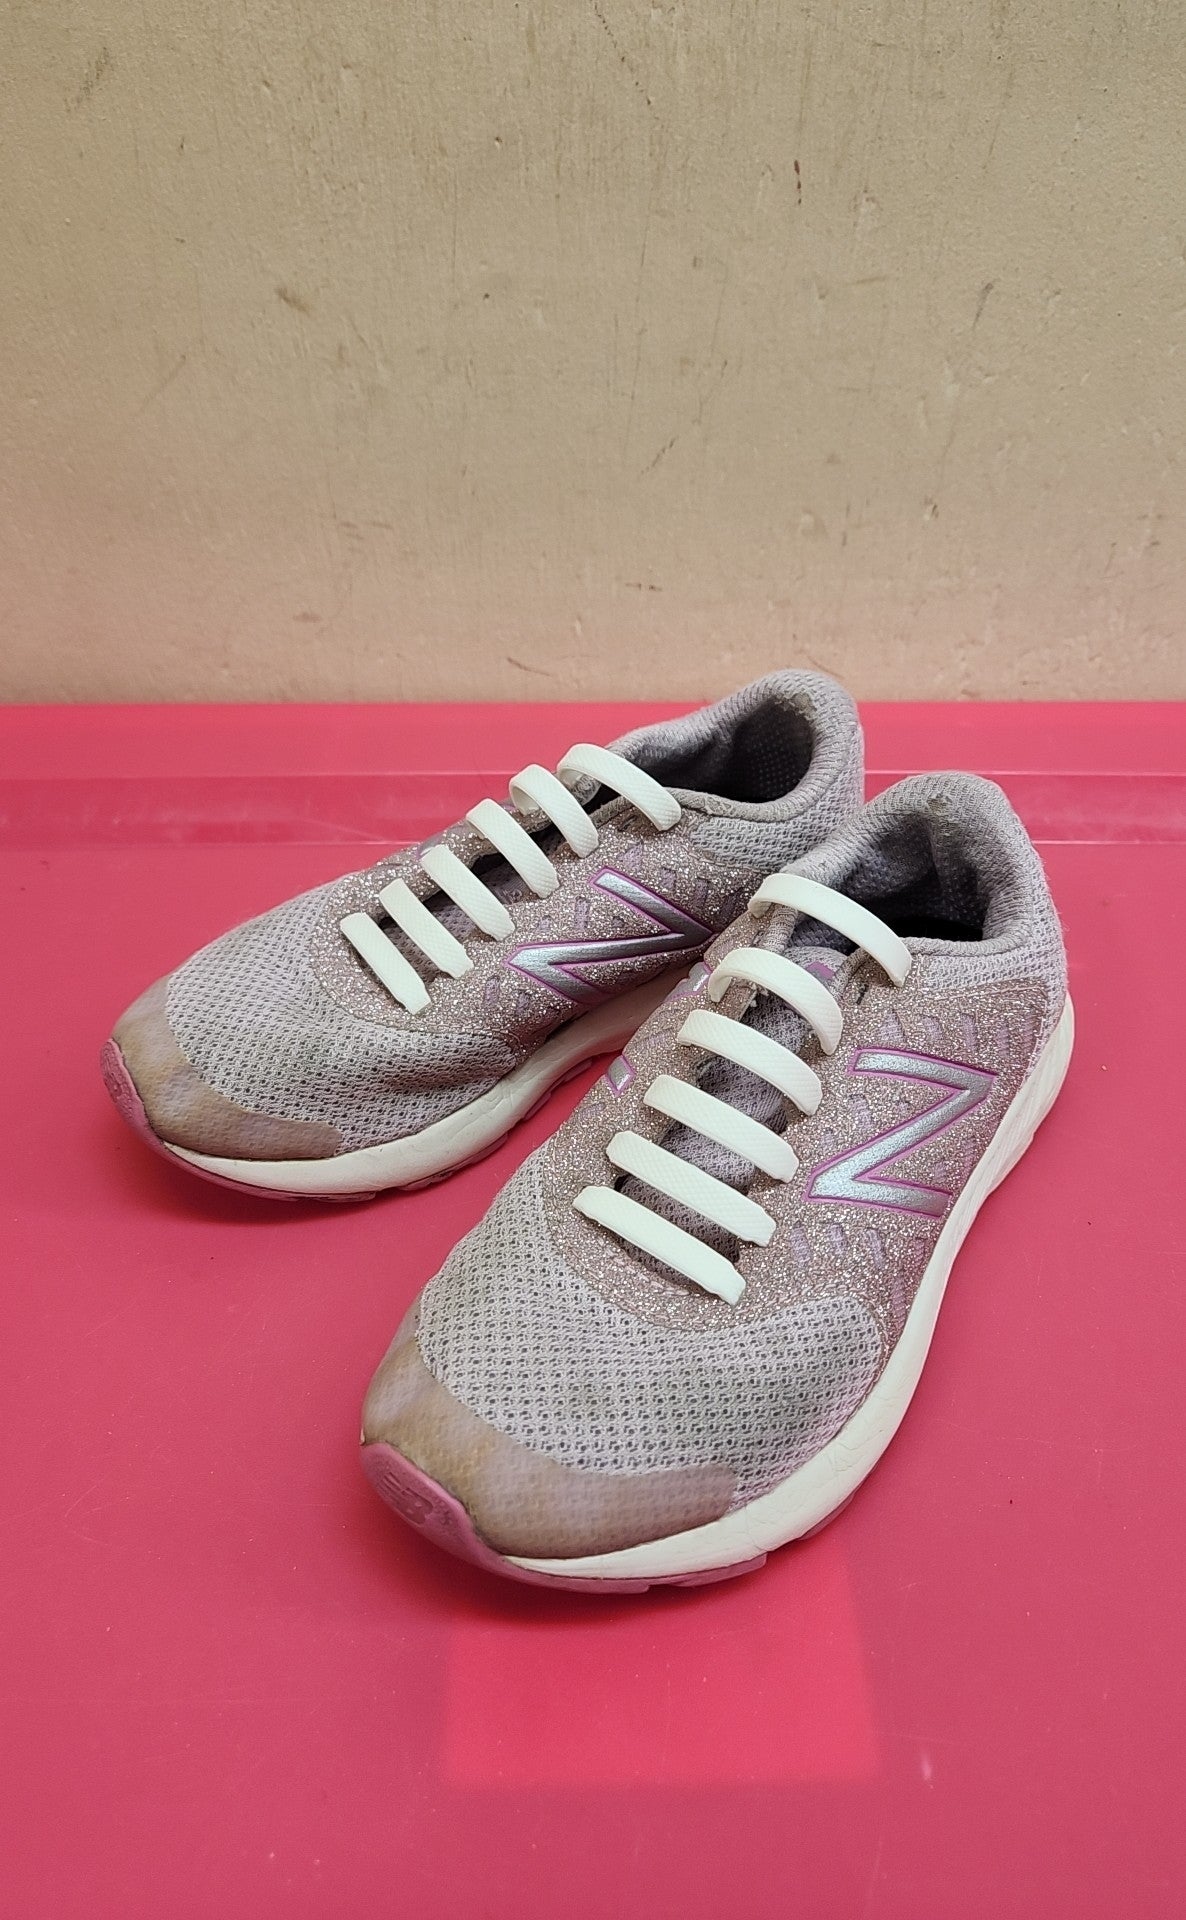 New Balance Girl's Size 13 Pink Sneakers